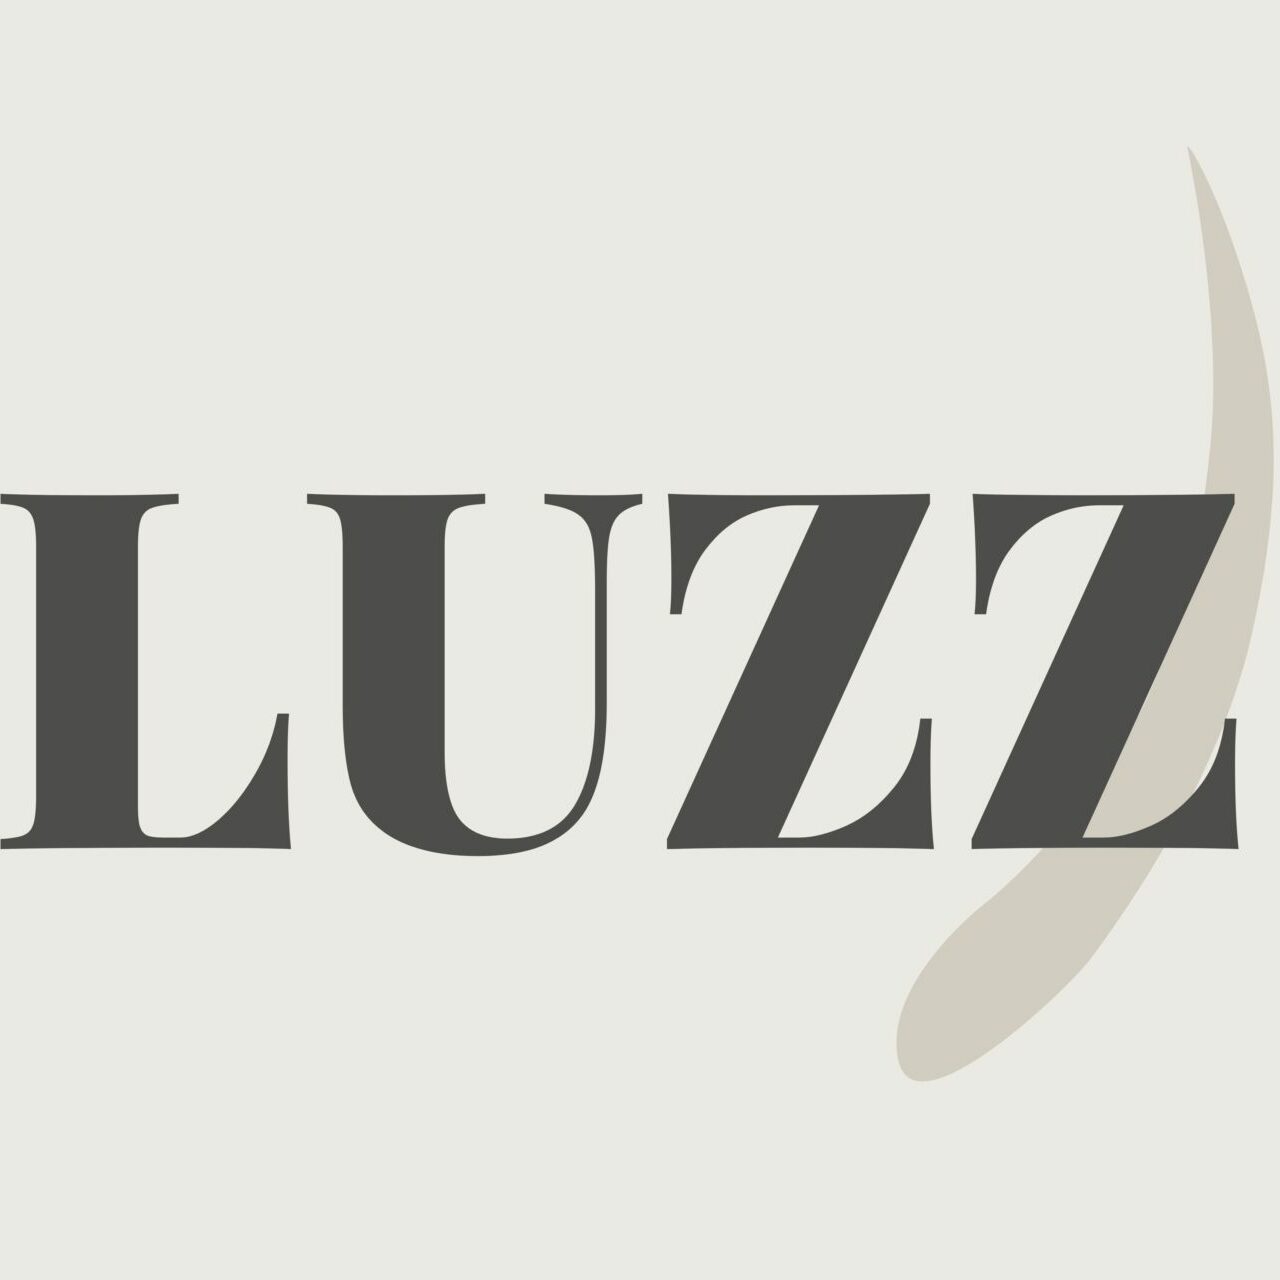 Luzz Candle